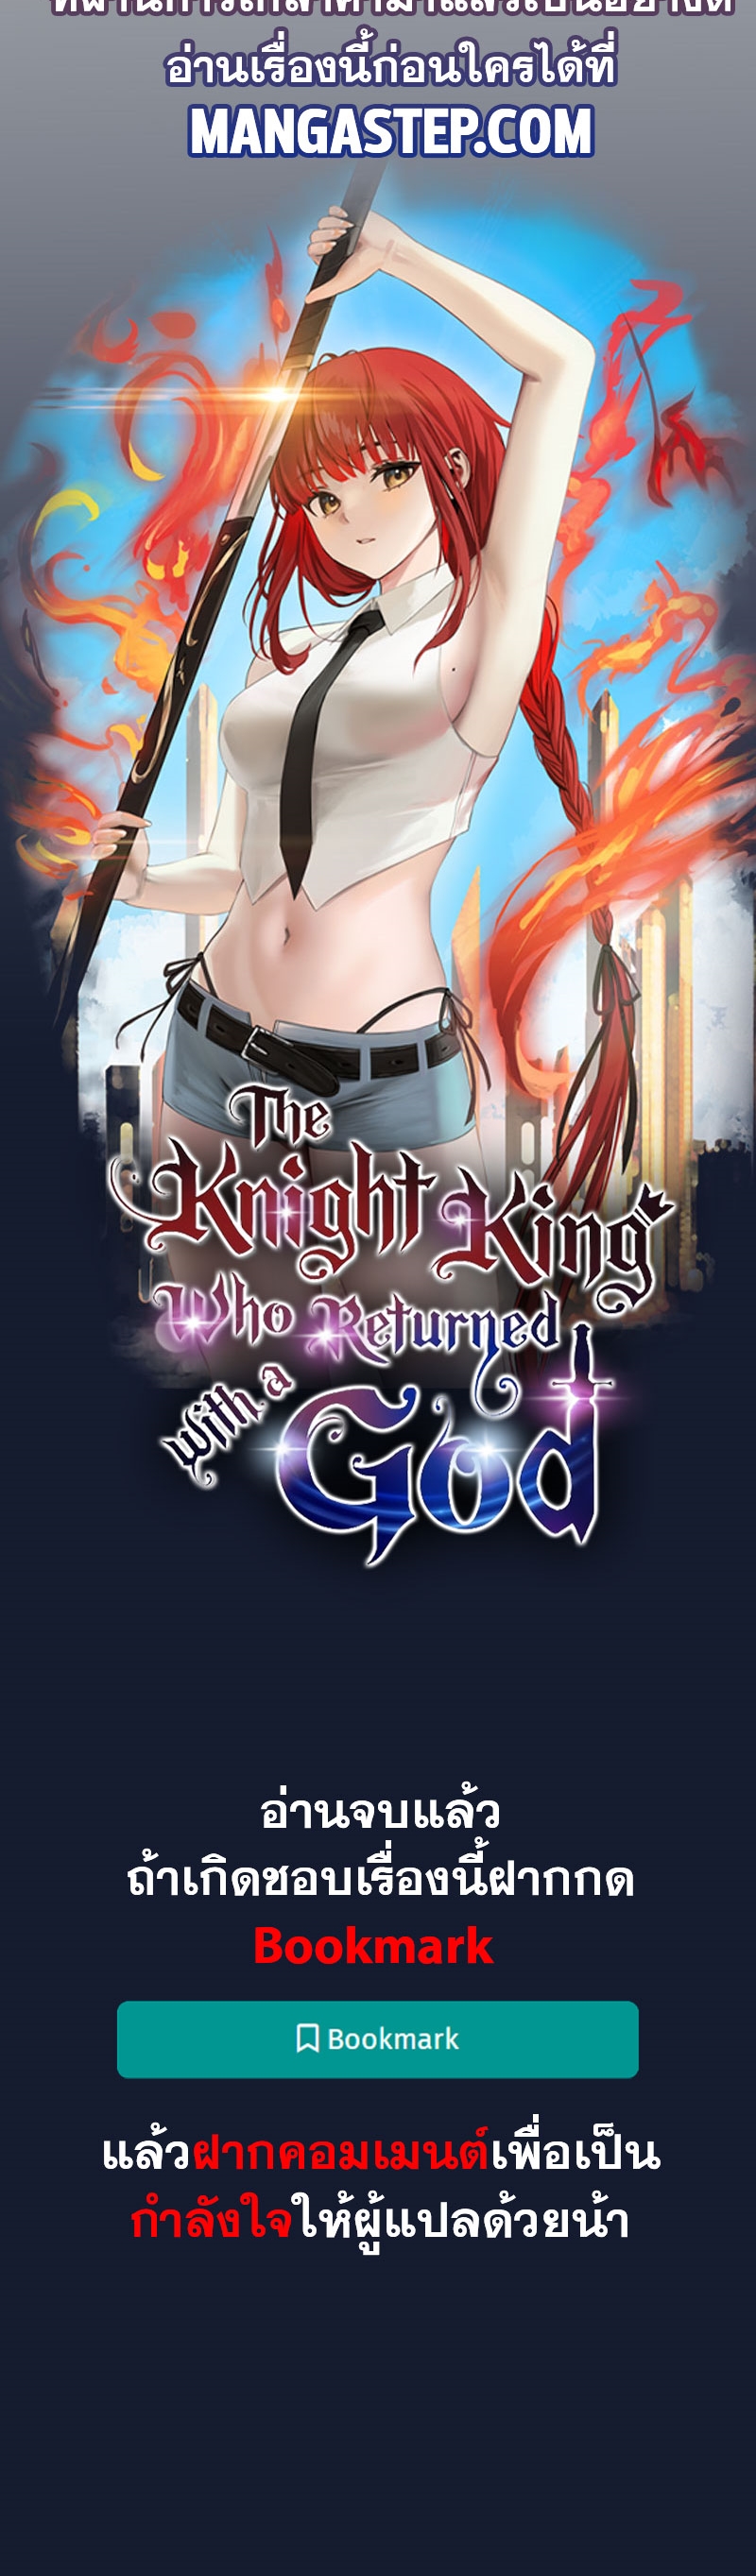 the knight king who returned with a god 12.40